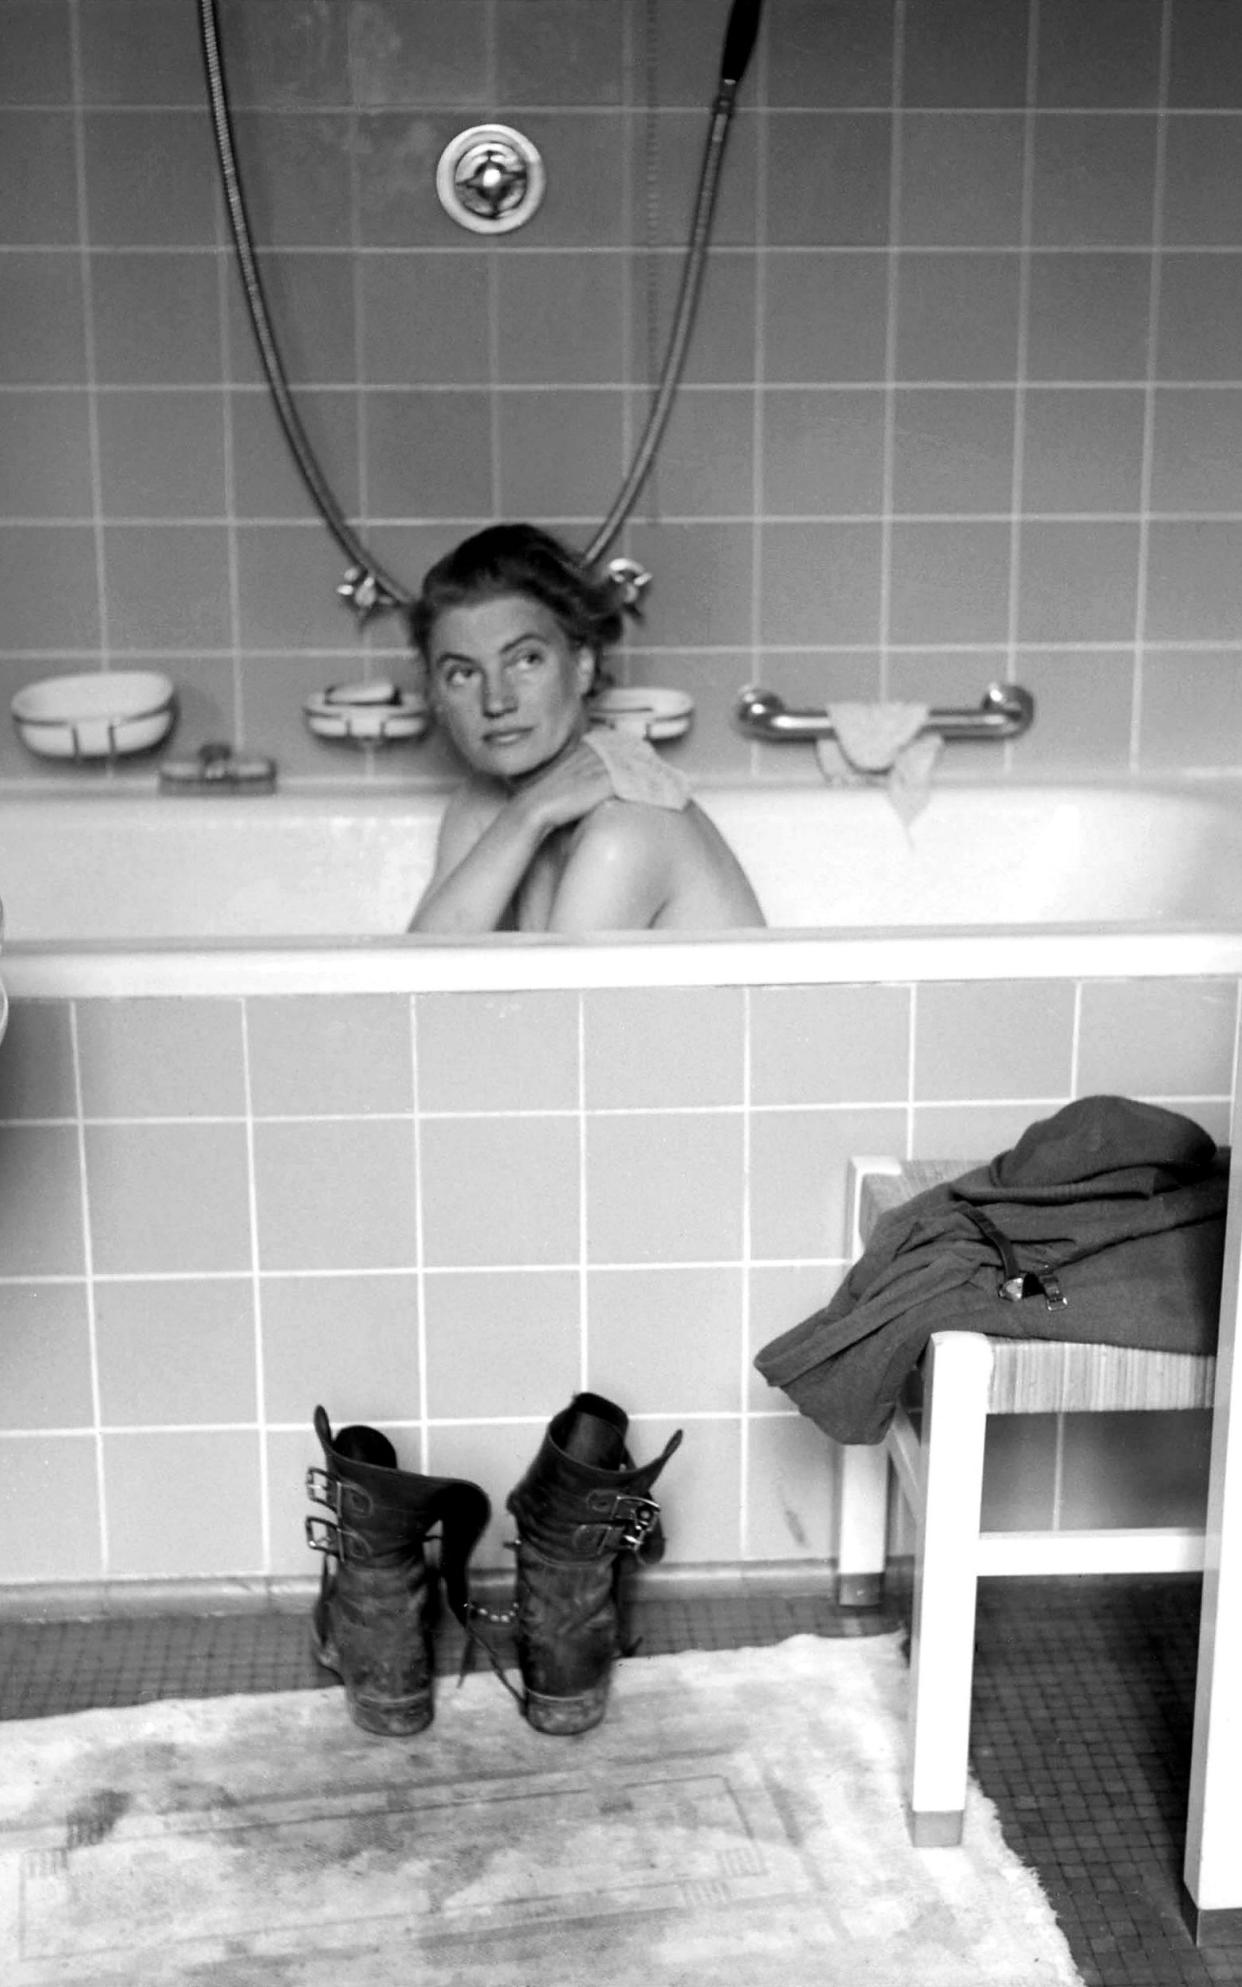 A portrait of Hitler sits on the edge of the bath, Miller's combat boots are on the floor in front of it, and her clothes and watch are on a chair